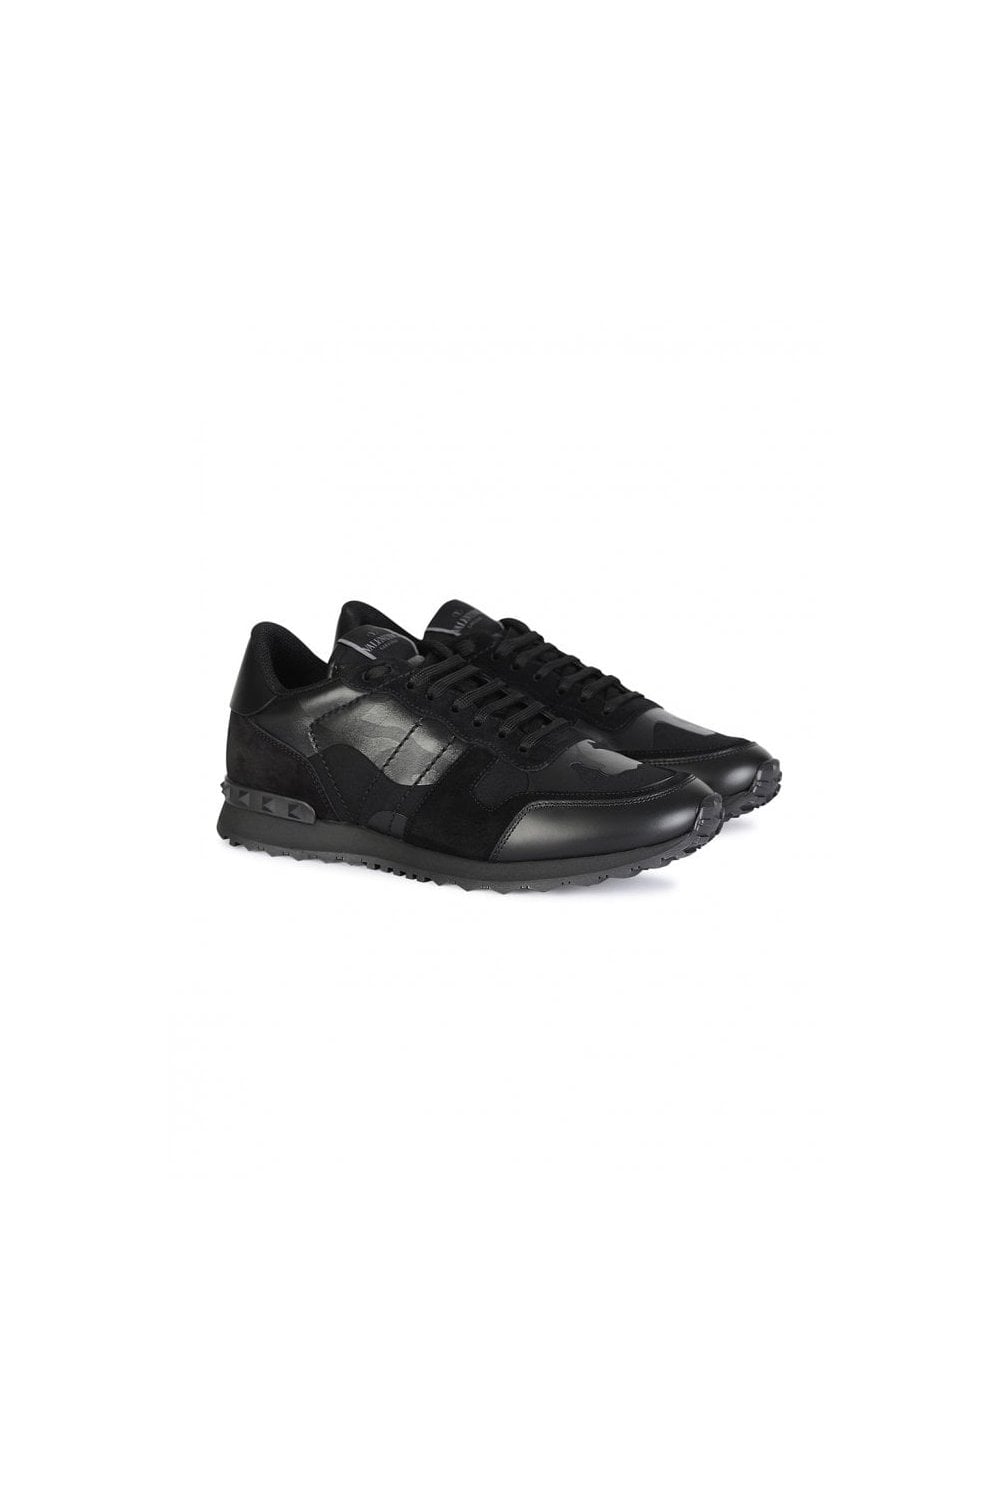 Valentino Cameo Rockrunner Trainers Black